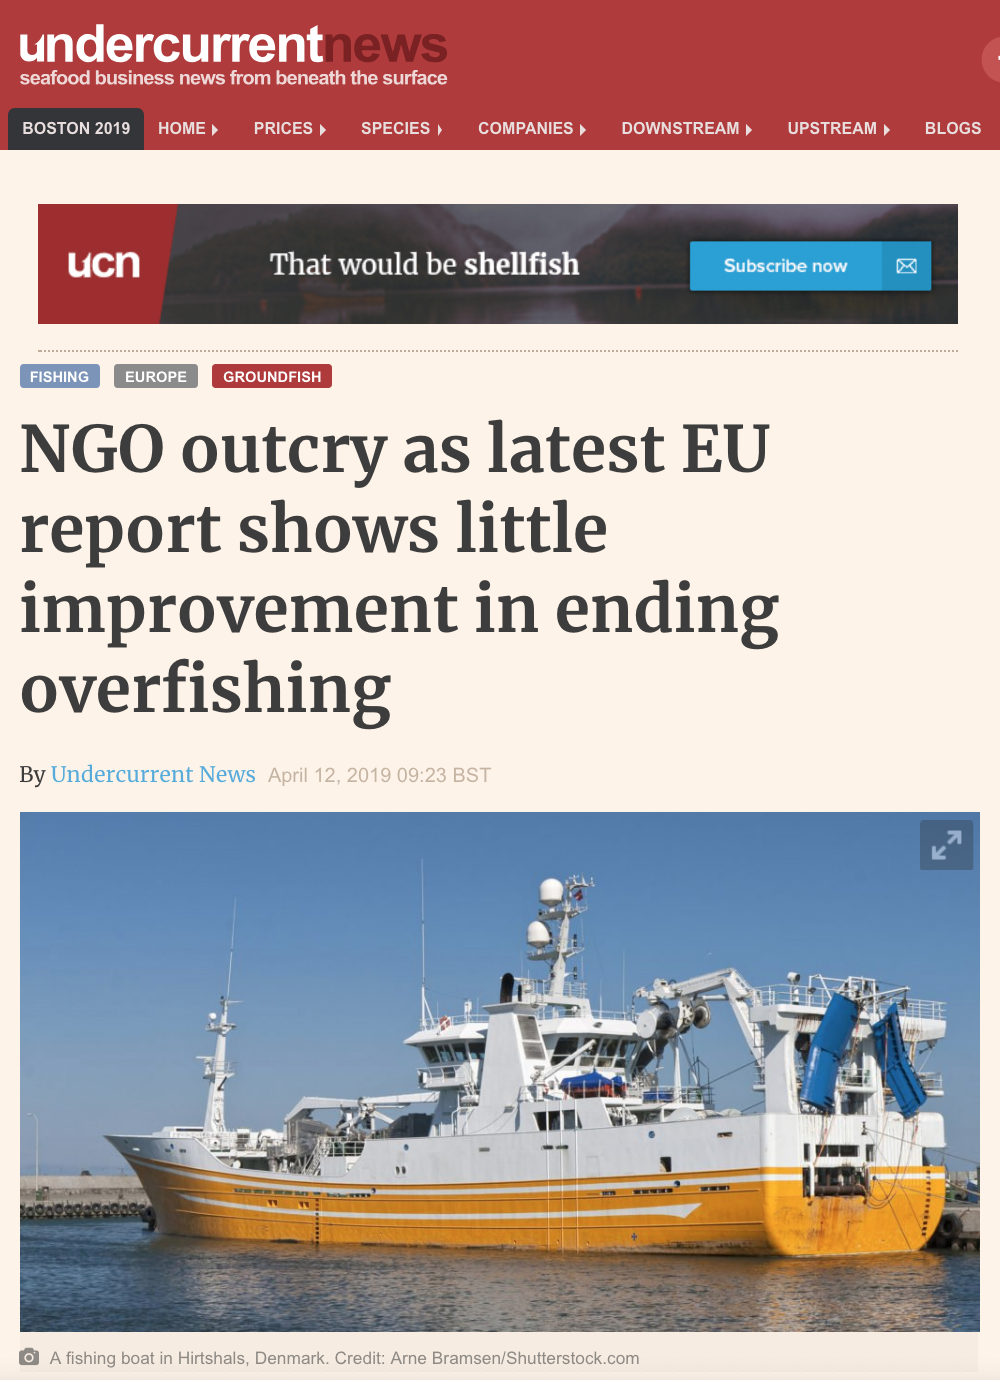 NGO outcry as latest EU report shows little improvement in ending overfishing